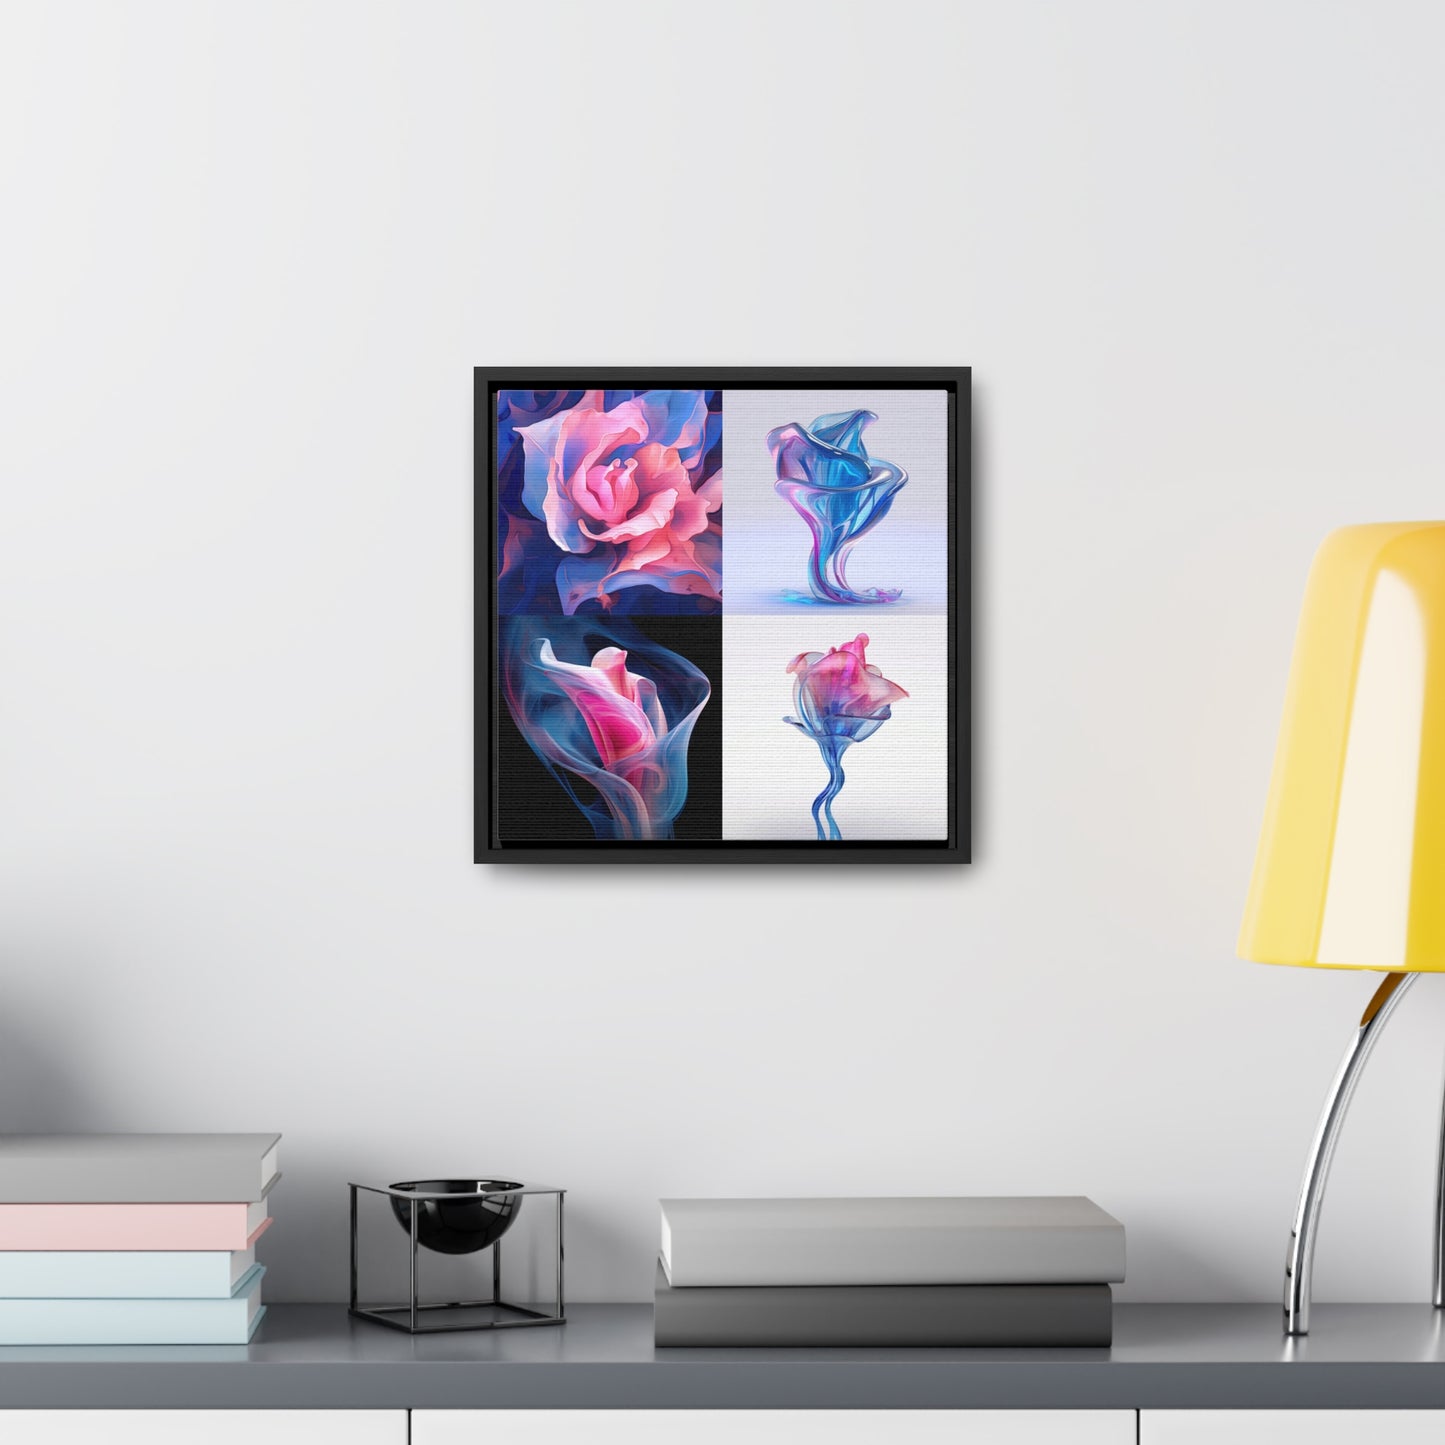 Gallery Canvas Wraps, Square Frame Pink & Blue Tulip Rose 5